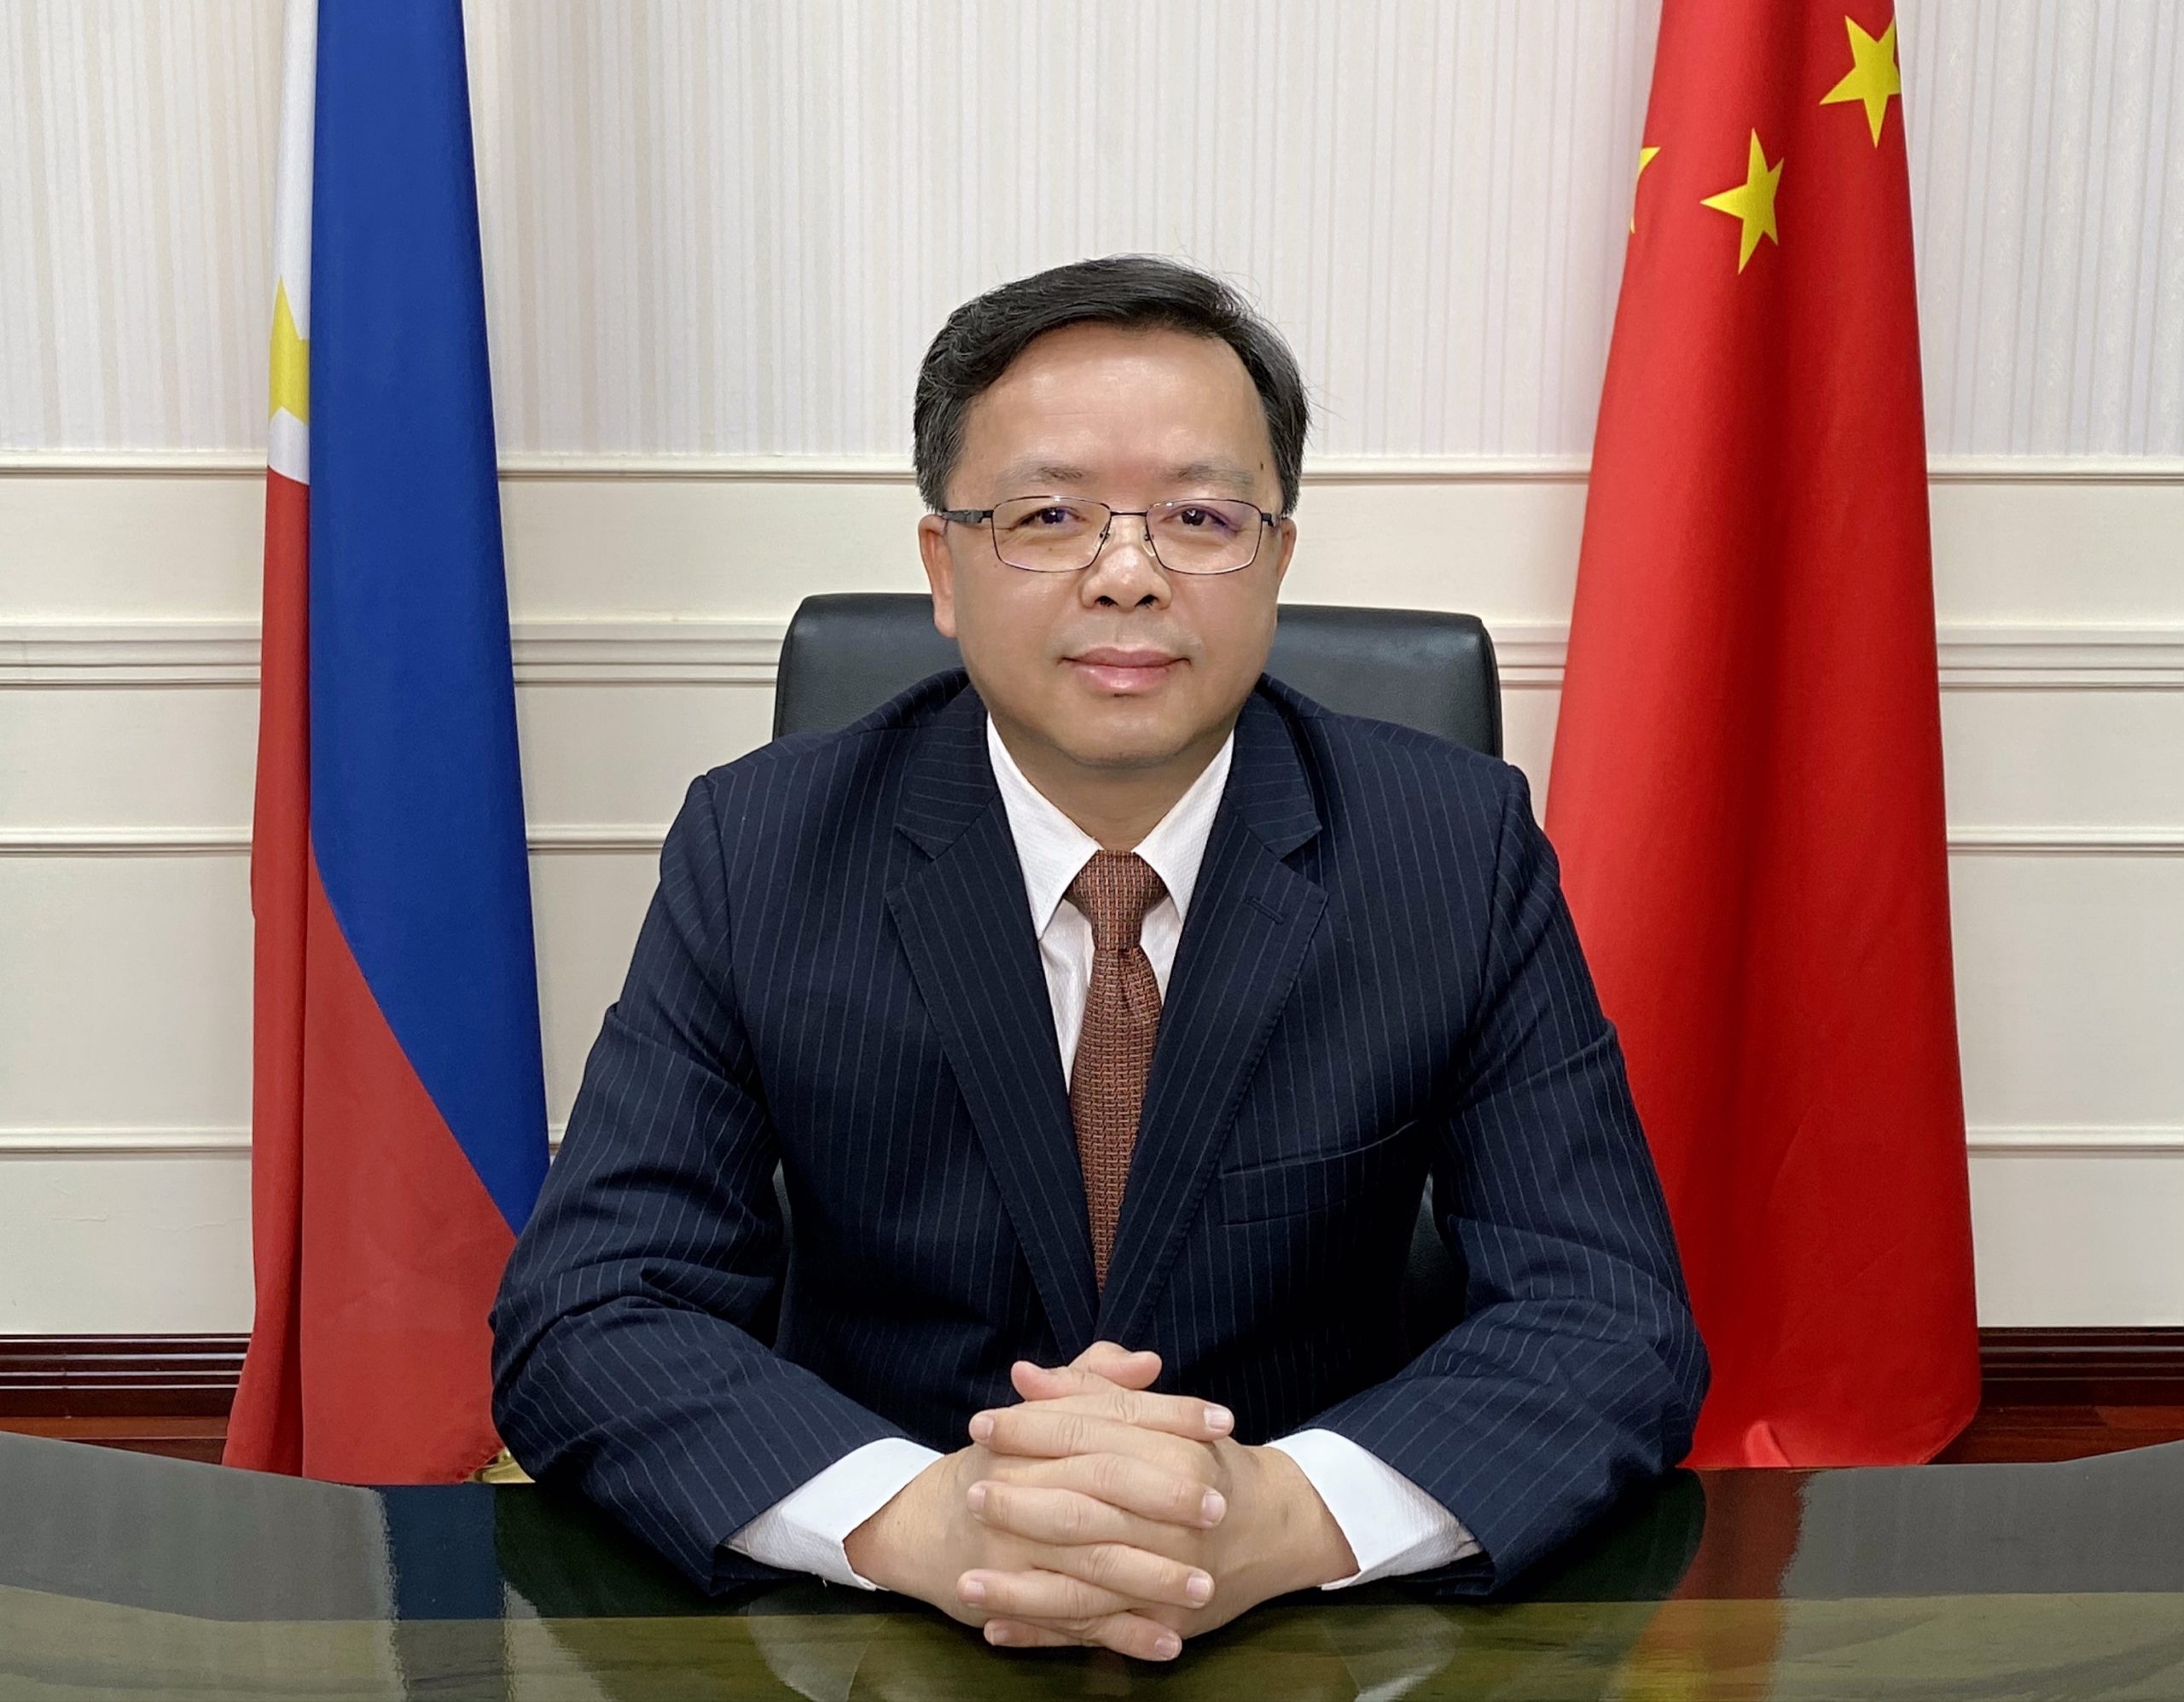 Chinese Ambassador to the Philippines Huang Xilian expresses hope that the ties between the Philippines and China will further strengthen